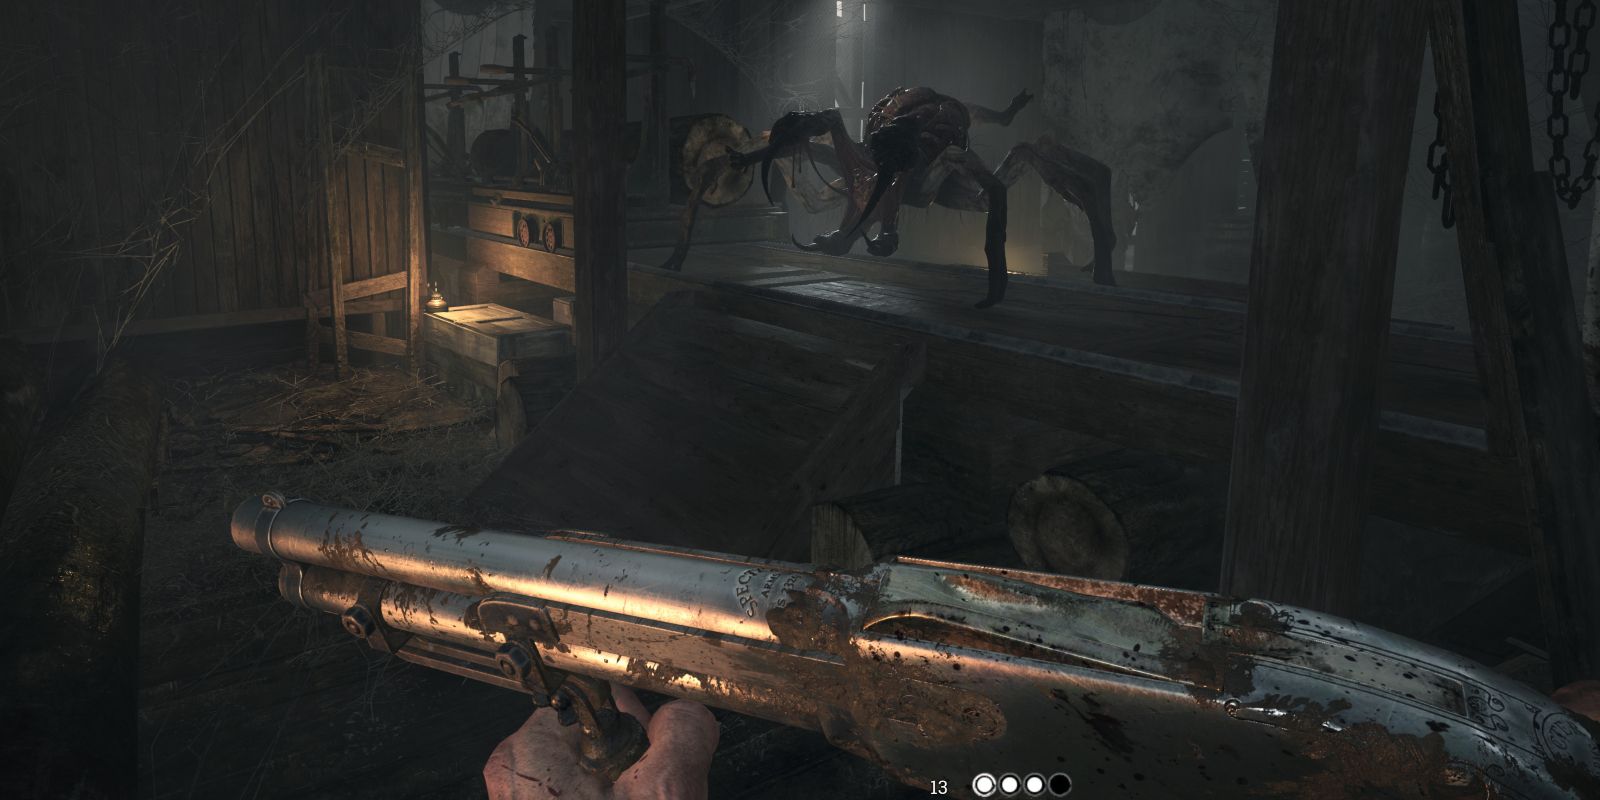 The player prepares to battle a giant spider in Hunt: Showdown